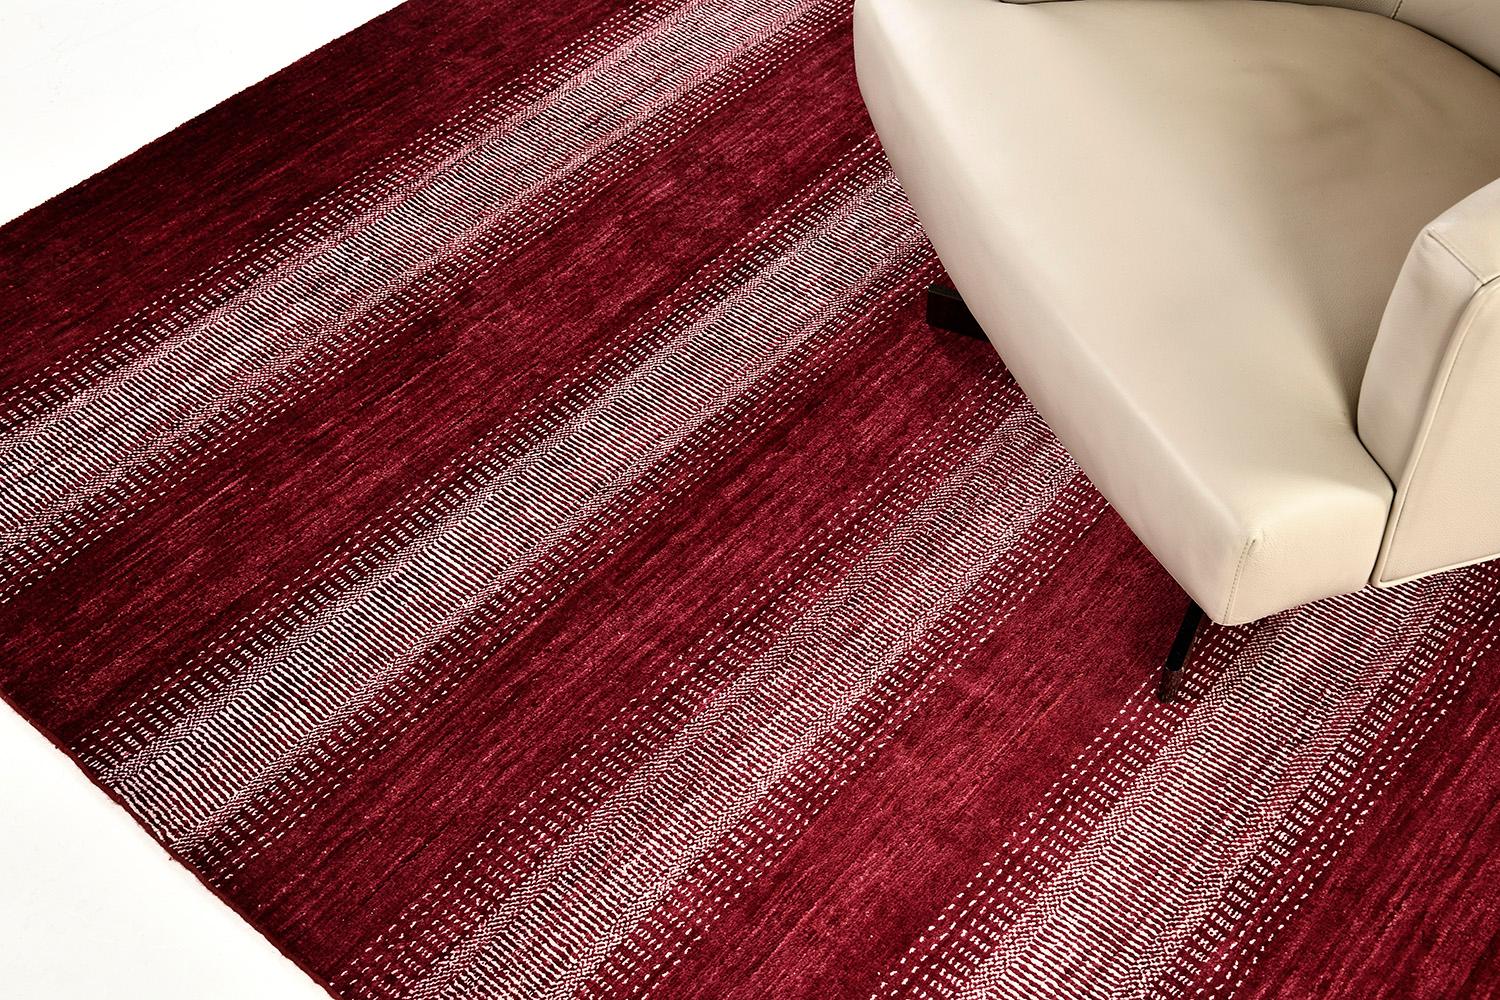 From our Naturale Varieties, this Essato Design features the vertical bands of blushing red and saturated black. Essato is known for its playful colors that your home furnishings and decors are perfect for the contemporary interiors.

Rug Number